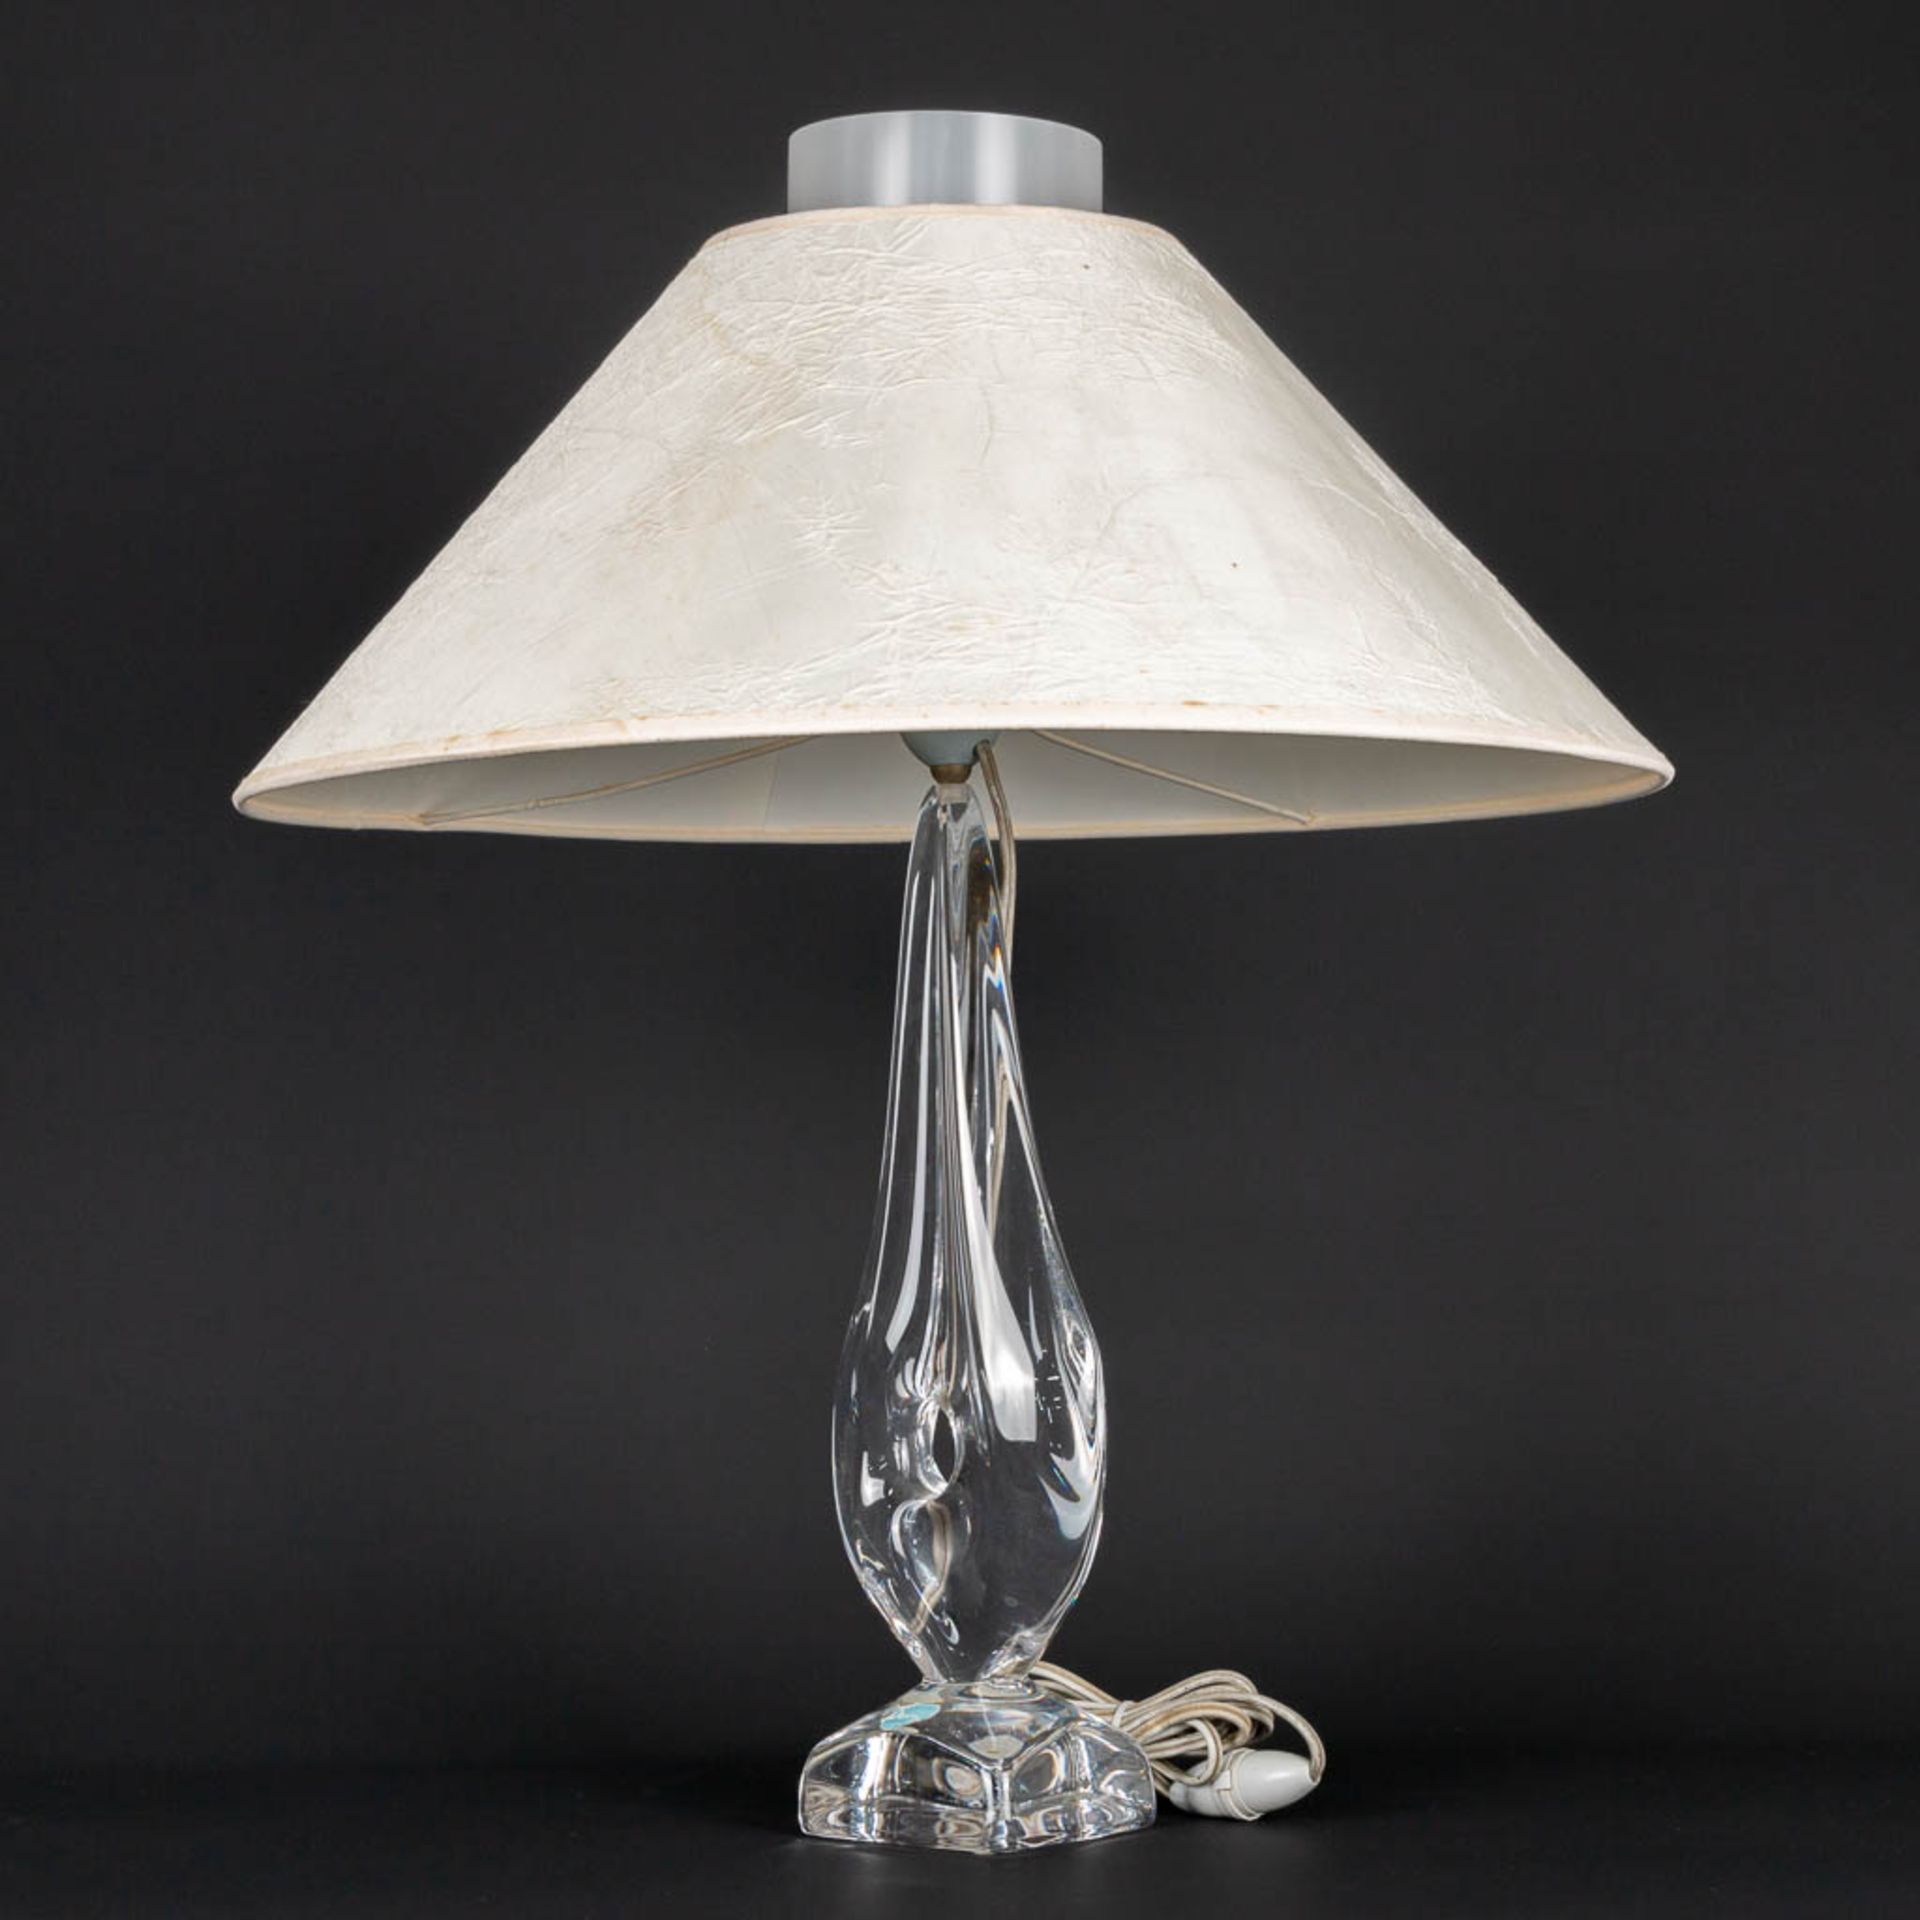 A Daum Nancy table lamp made of crystal with a fabric lamp shade. 20th century. (9 x 9 x 33 cm) - Image 7 of 12